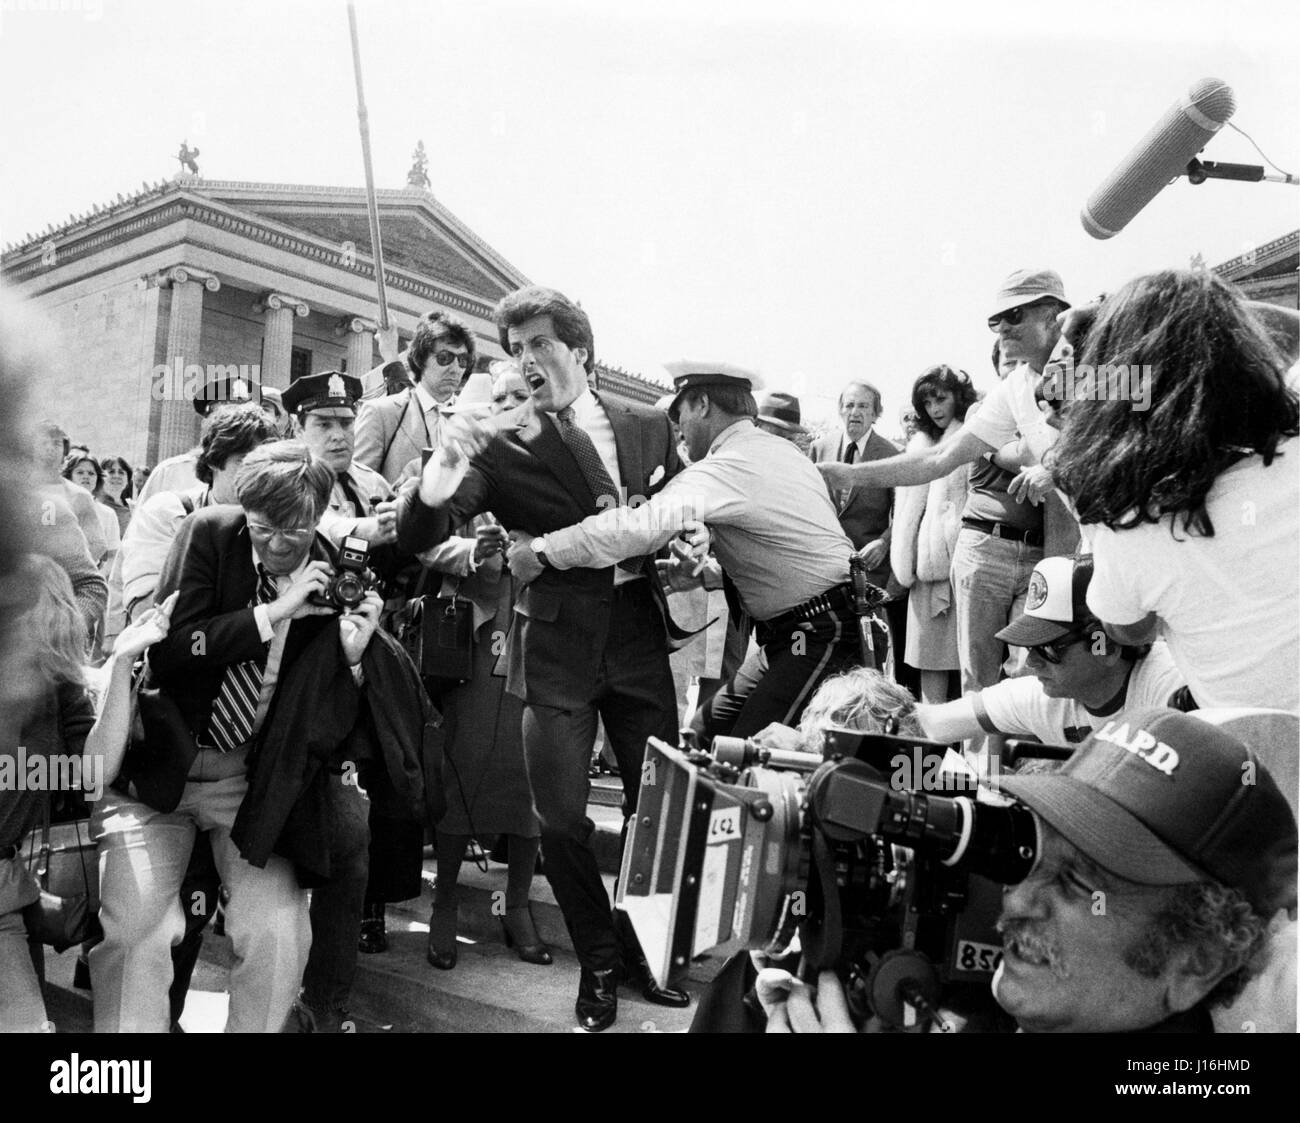 Photograph of Sylvester Stallone filming Rocky III in Philadelphia, PA in 1982. © mpi09 / MediaPunch Photograph of the Premiere of Rocky II at the Philadelphia Museum of Art in Philadelphia, PA in 1979. Stock Photo